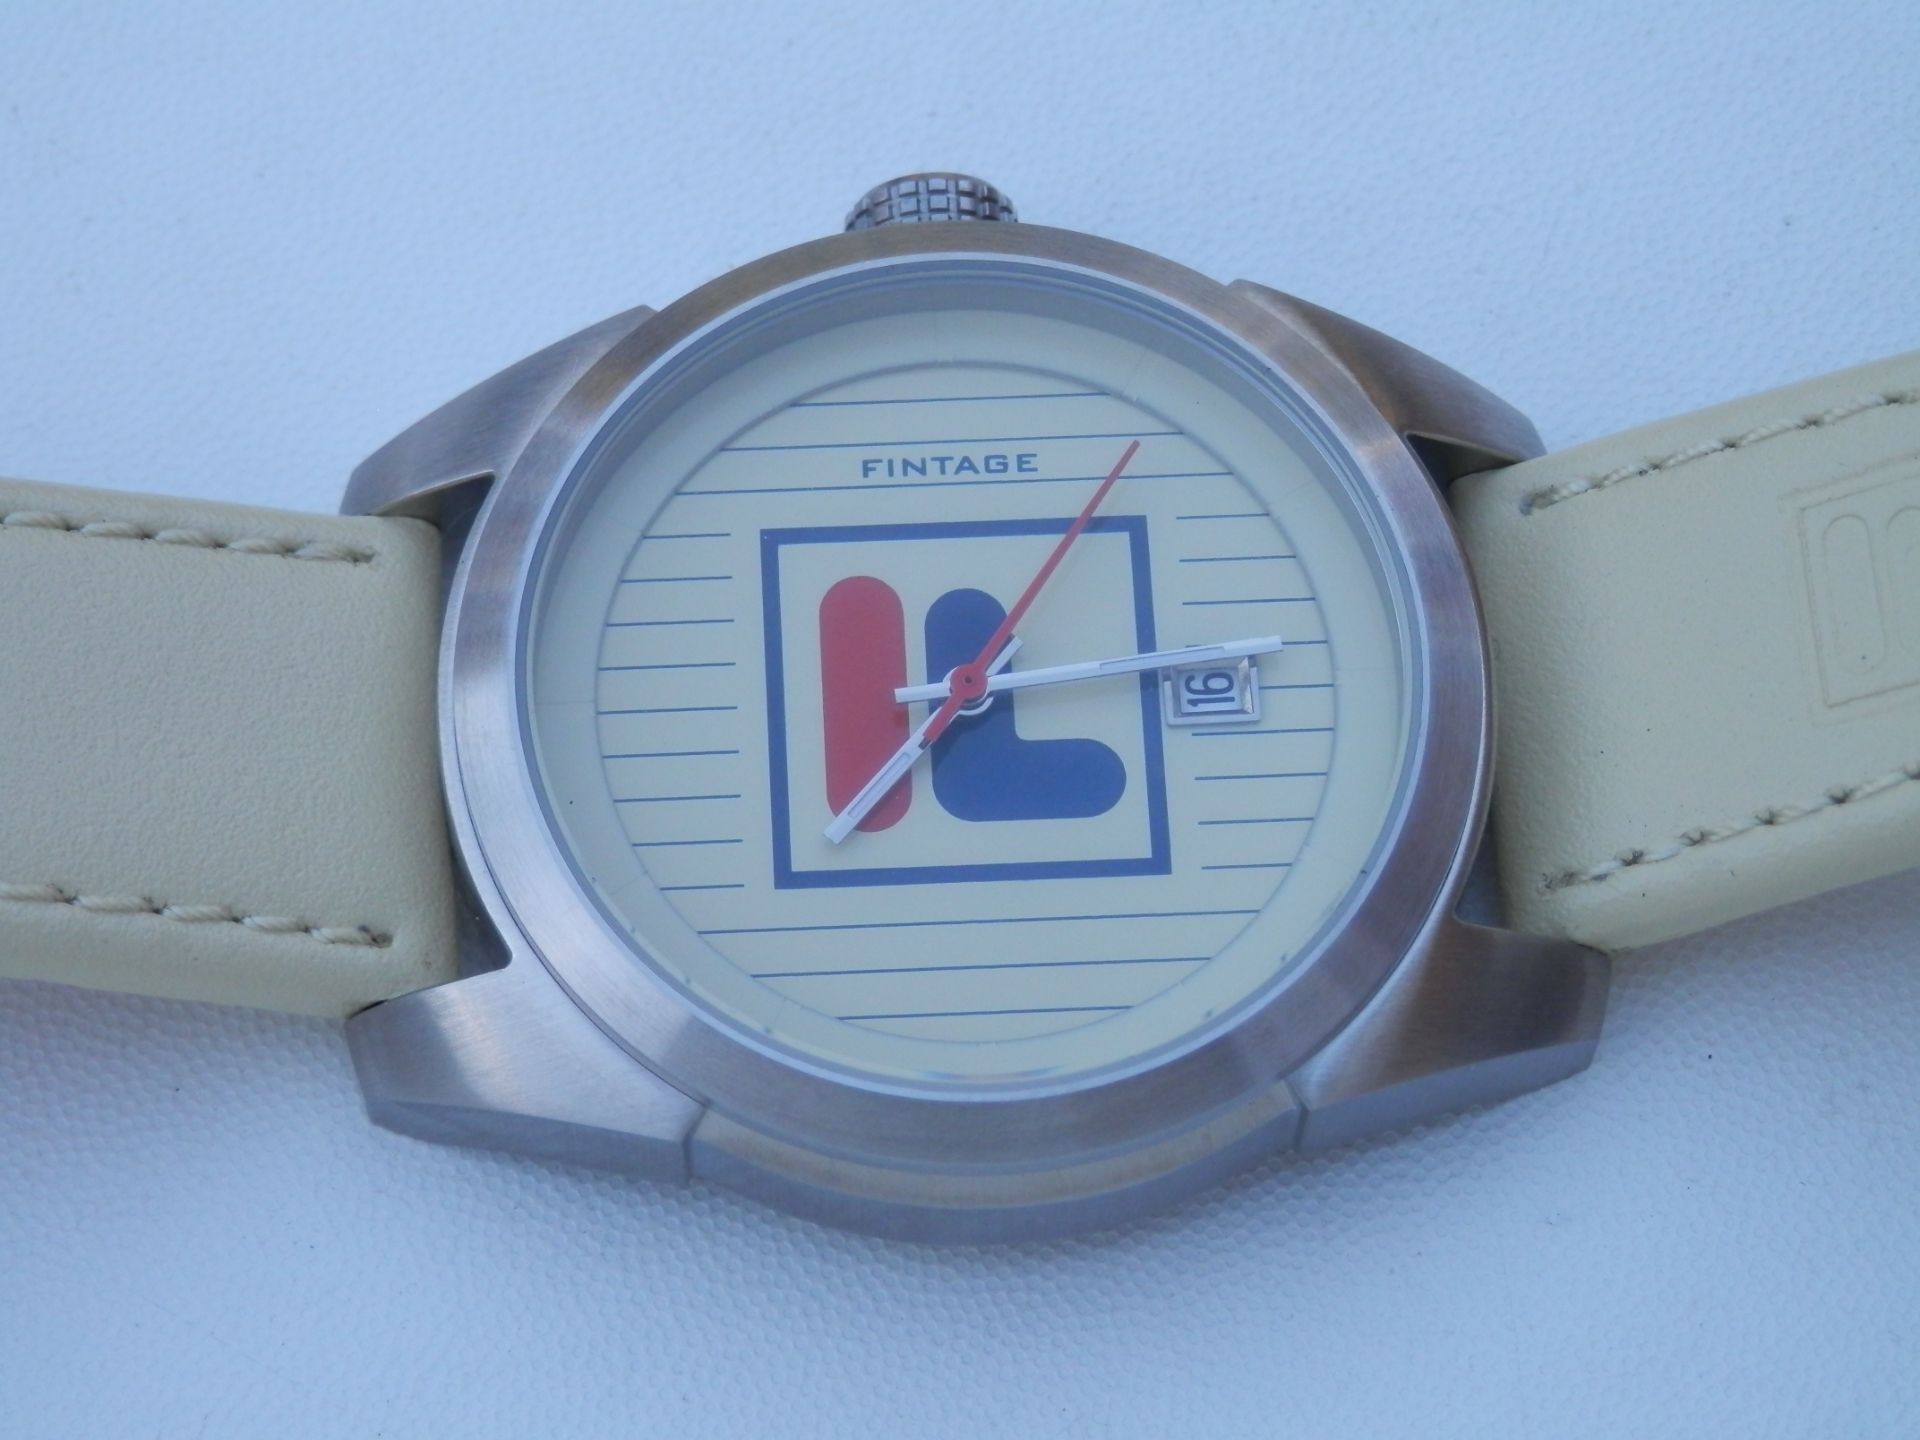 RRP £125 NEW GENTS GENUINE FILA FINTAGE FULL STAINLESS QUARTZ DATE WATCH IN BOX. - Image 10 of 14